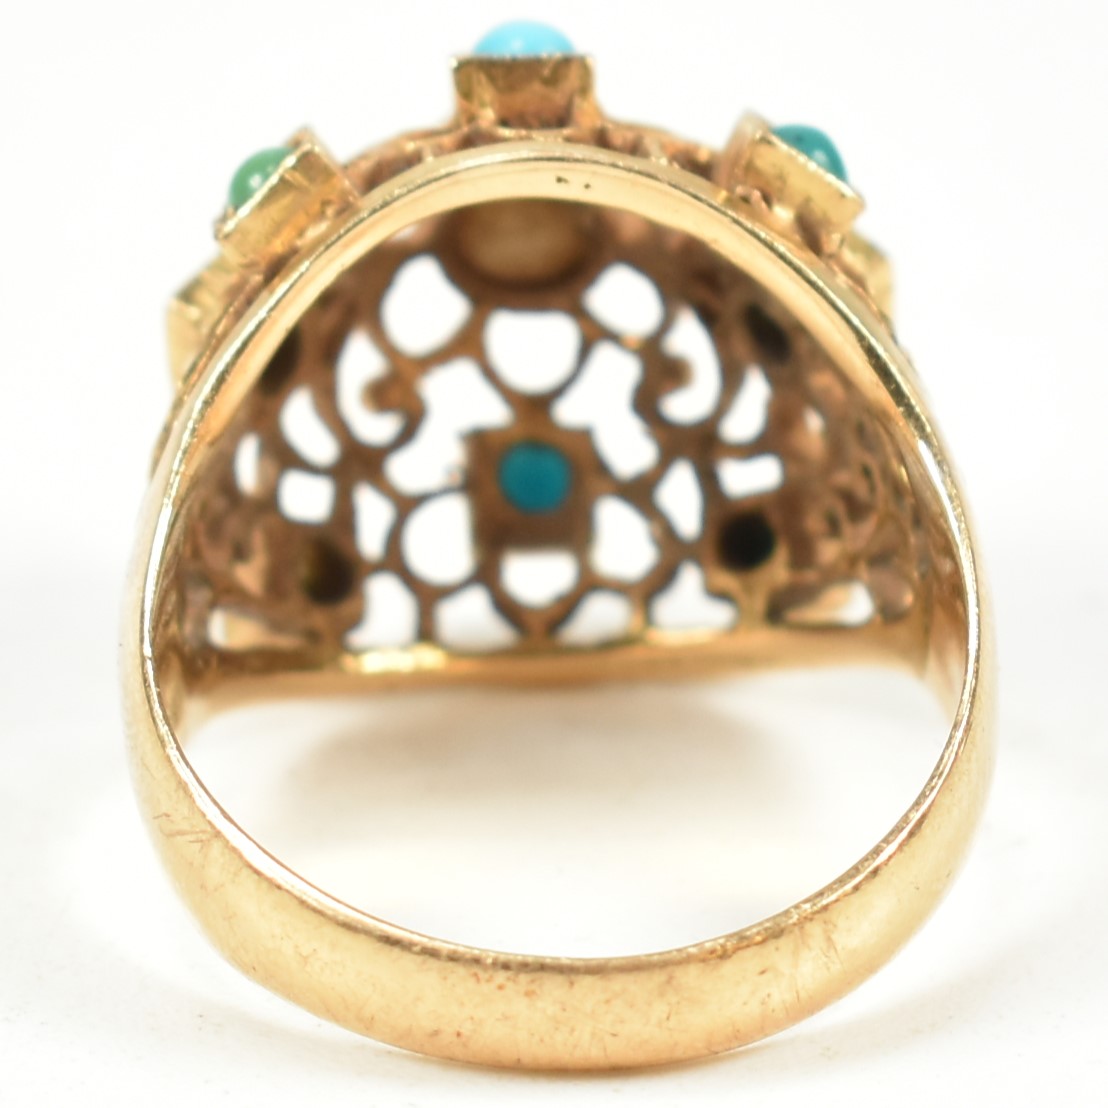 18CT GOLD & TURQUOISE BOMBE RING - Image 2 of 10